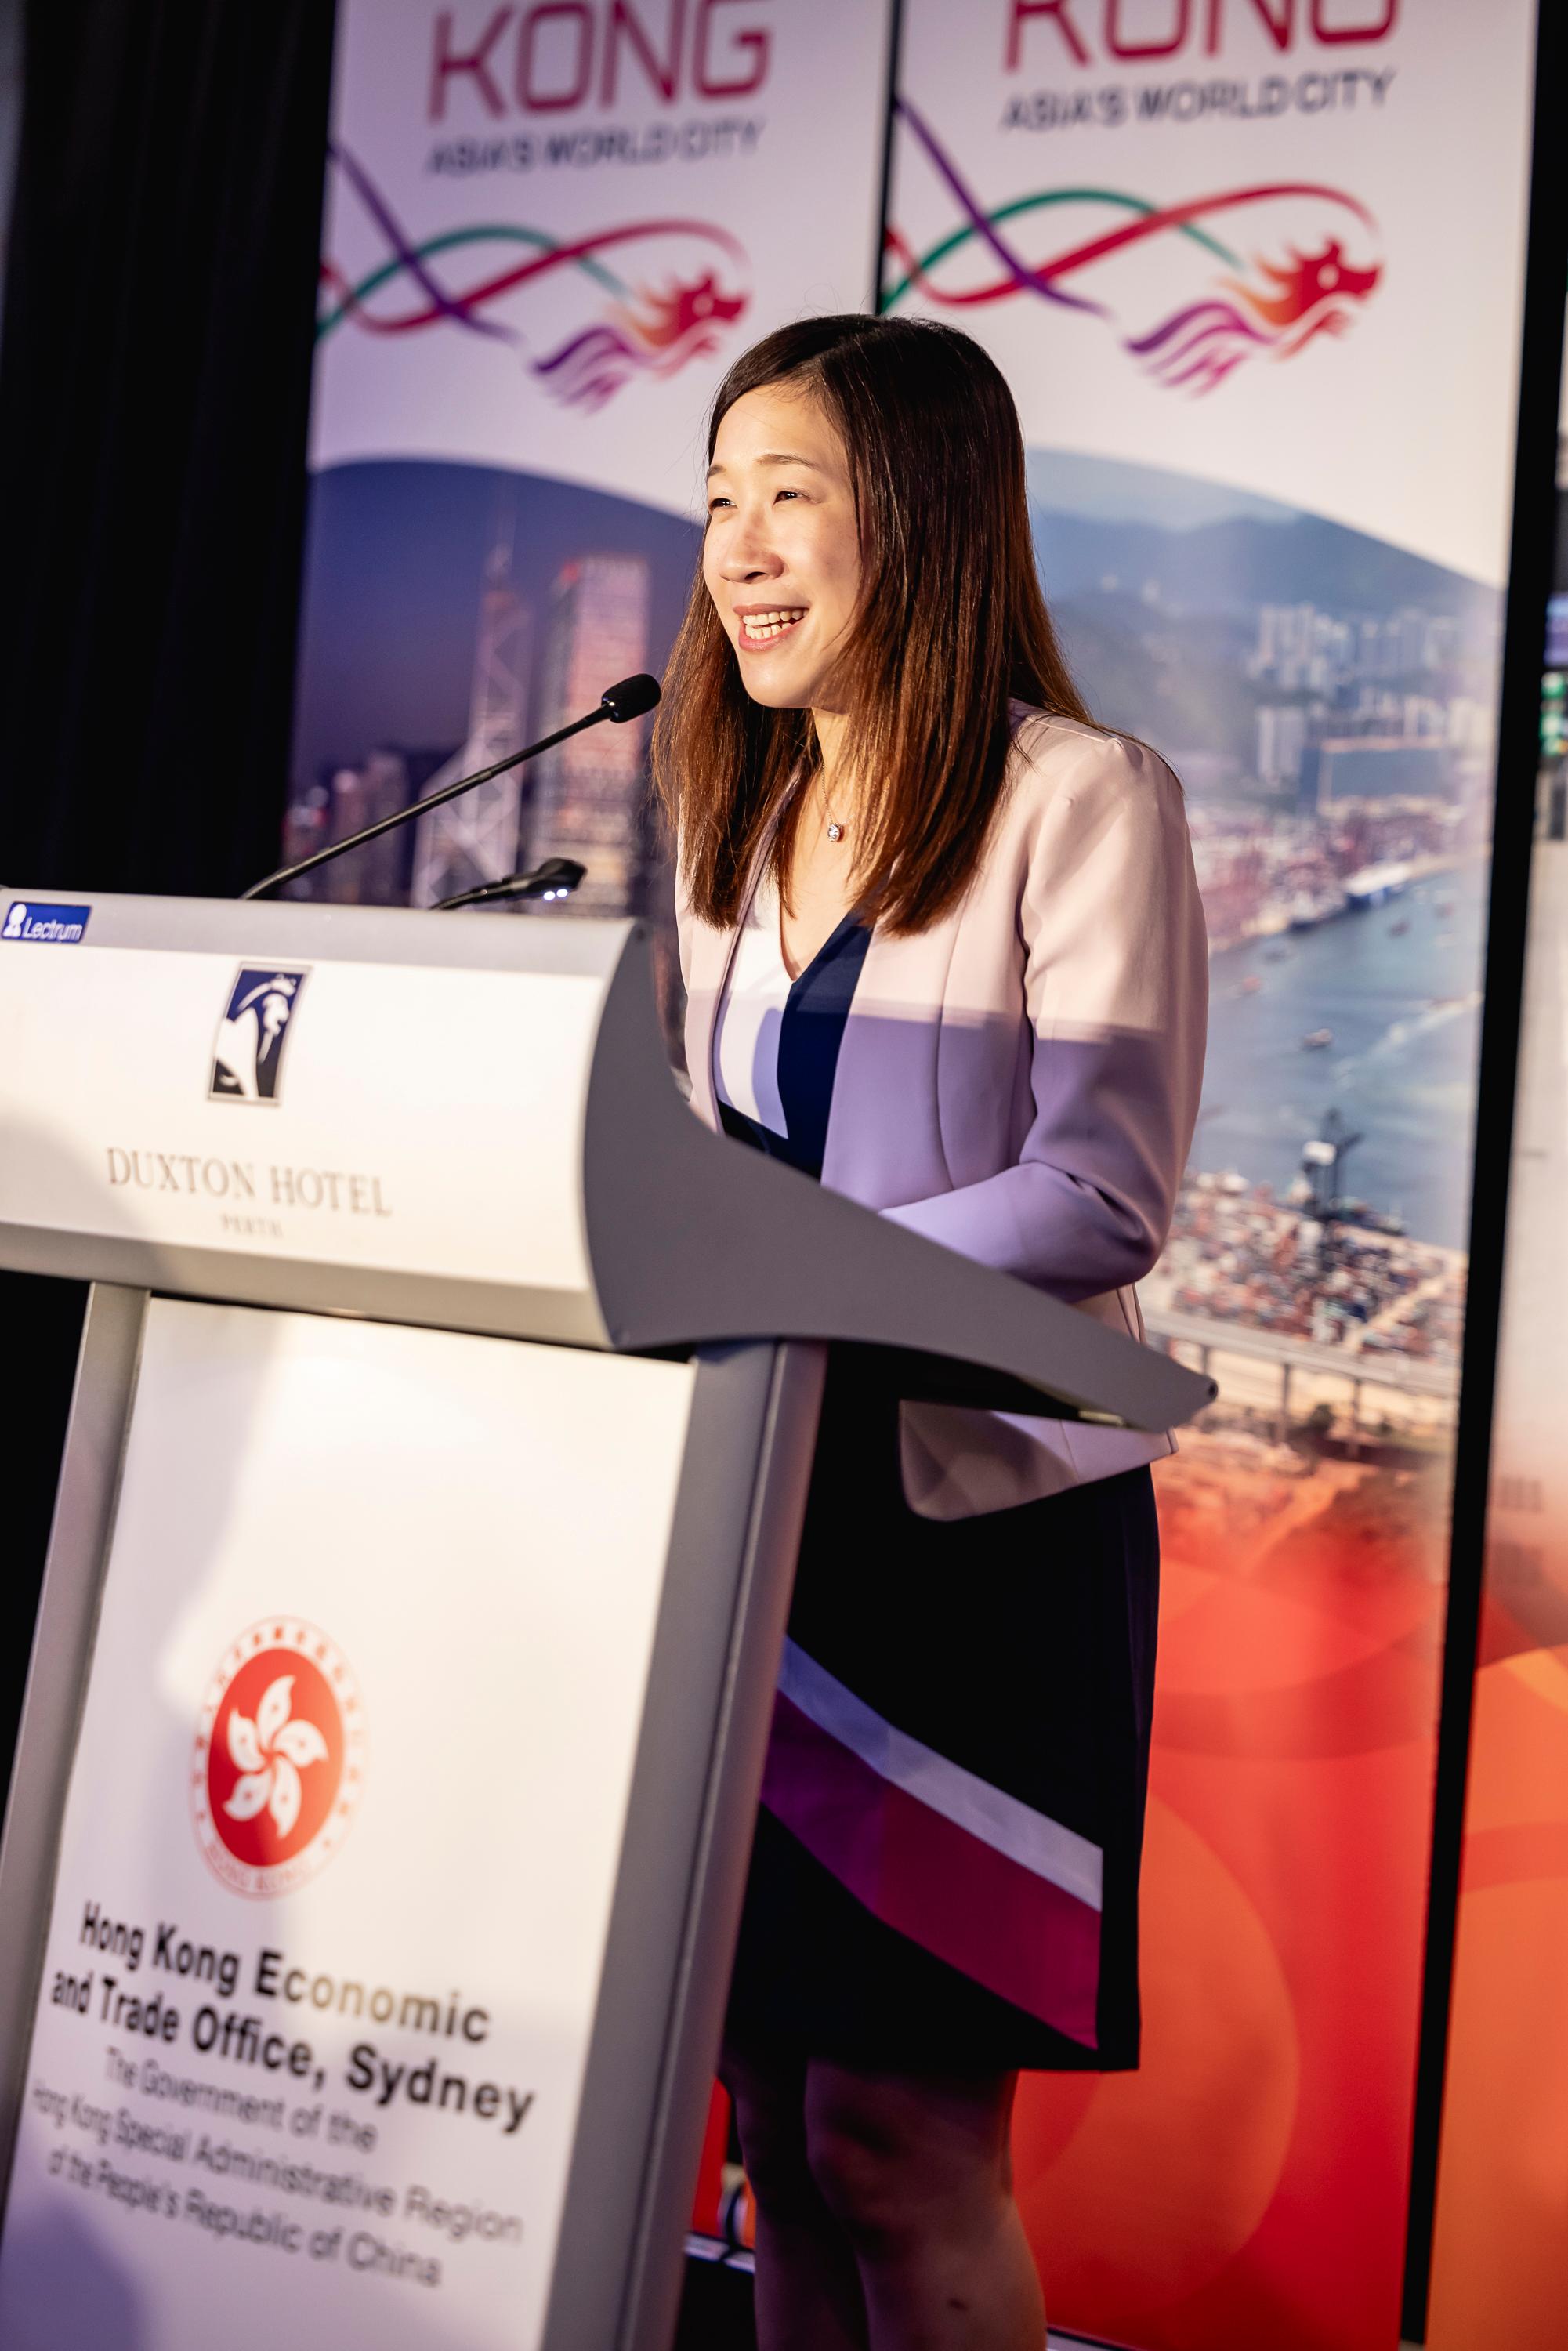 The Director of the Hong Kong Economic and Trade Office, Sydney, Miss Trista Lim, delivers a welcoming speech at the Chinese New Year reception held in Perth, Australia, today (March 7).